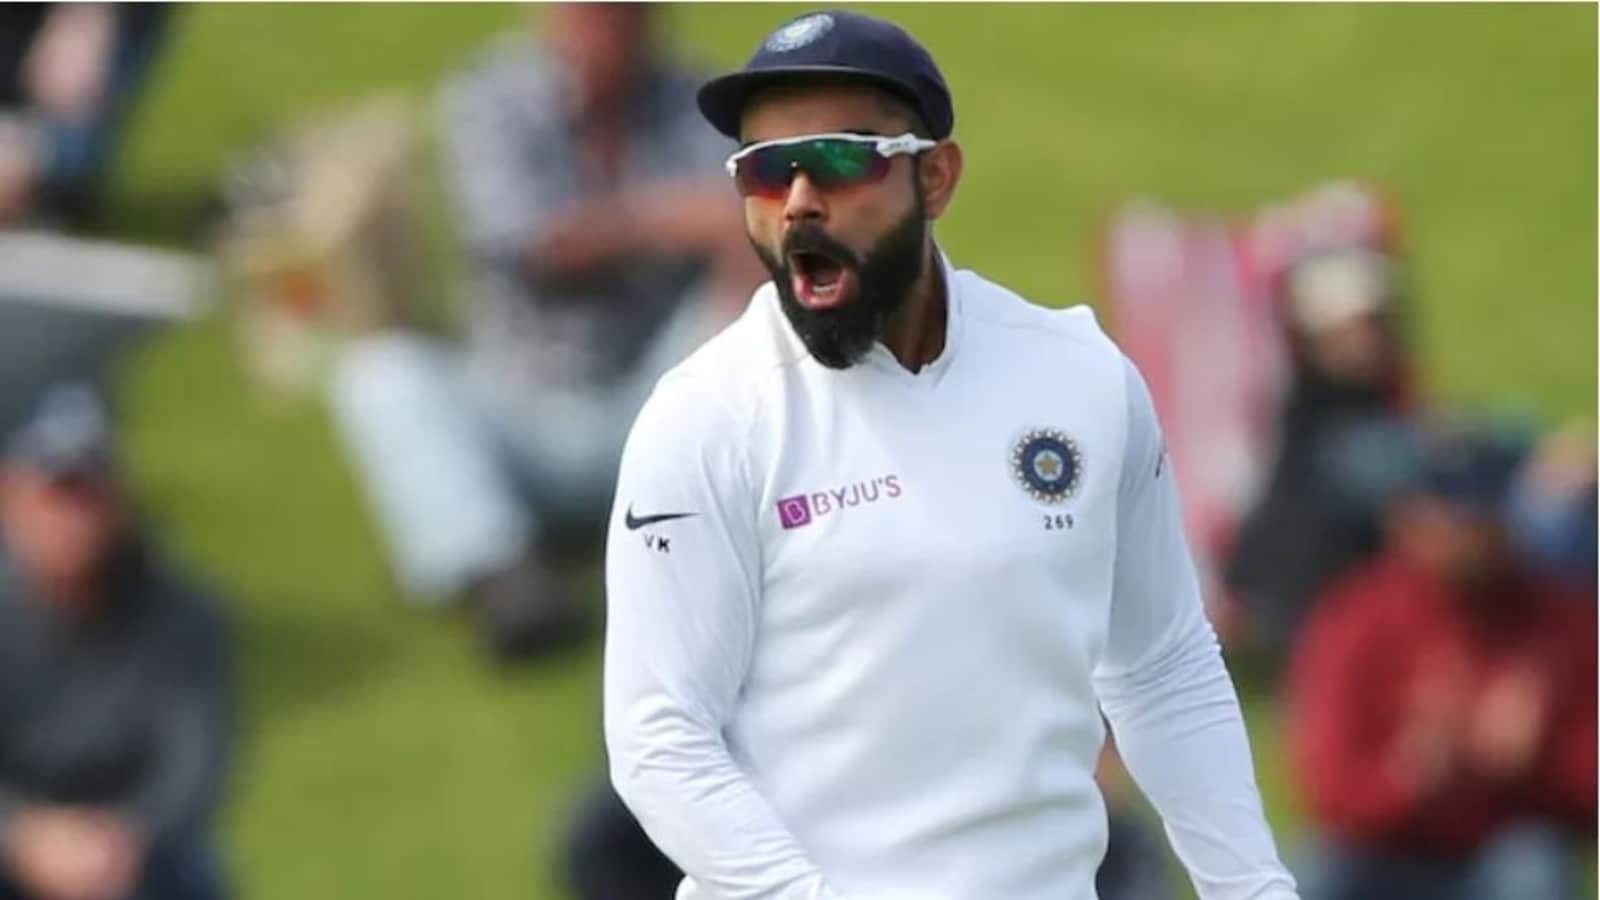 Angry young positive man': Former cricketer says Virat Kohli wants to show the world why Team India is No. 1